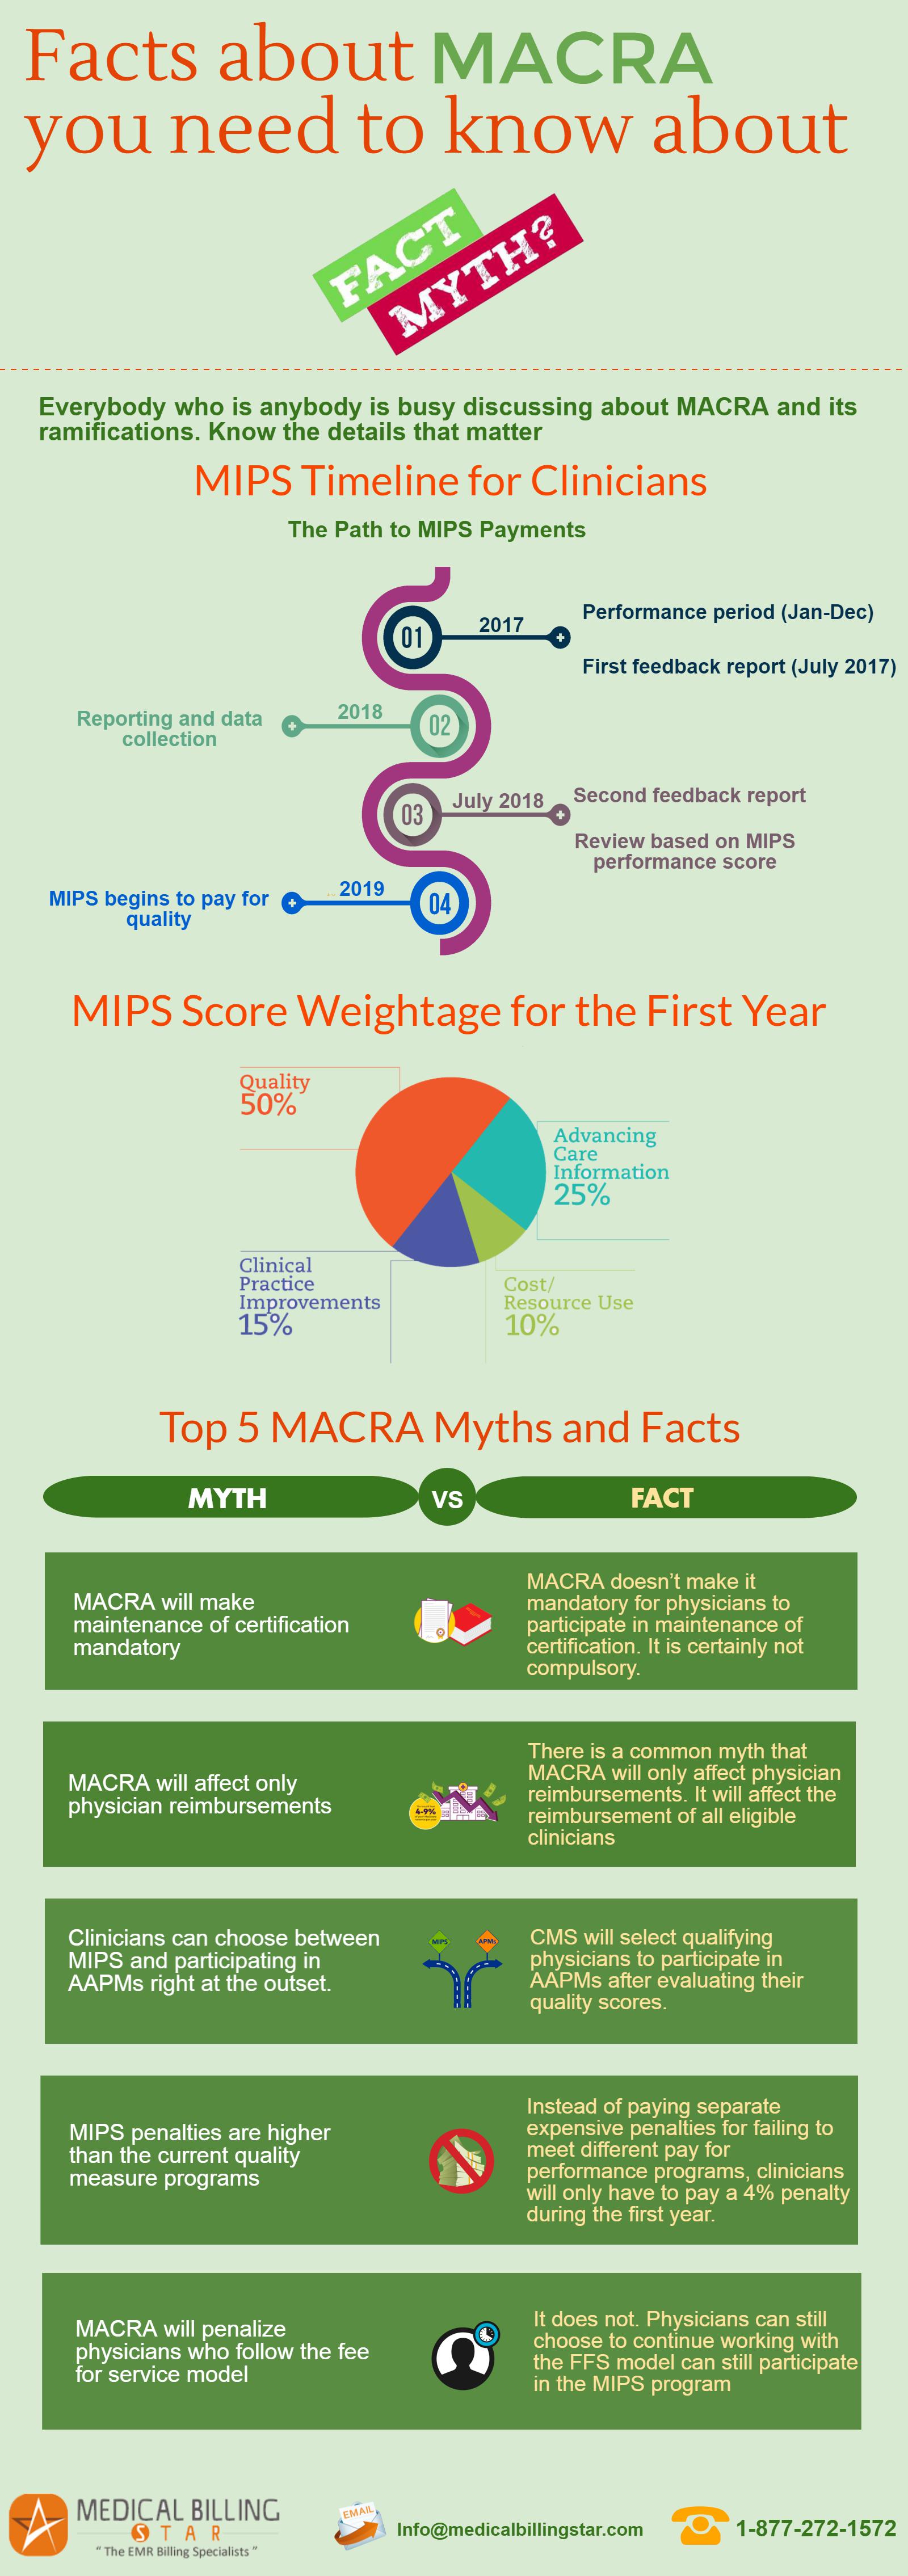 Top 5 Myths vs Facts of Macra